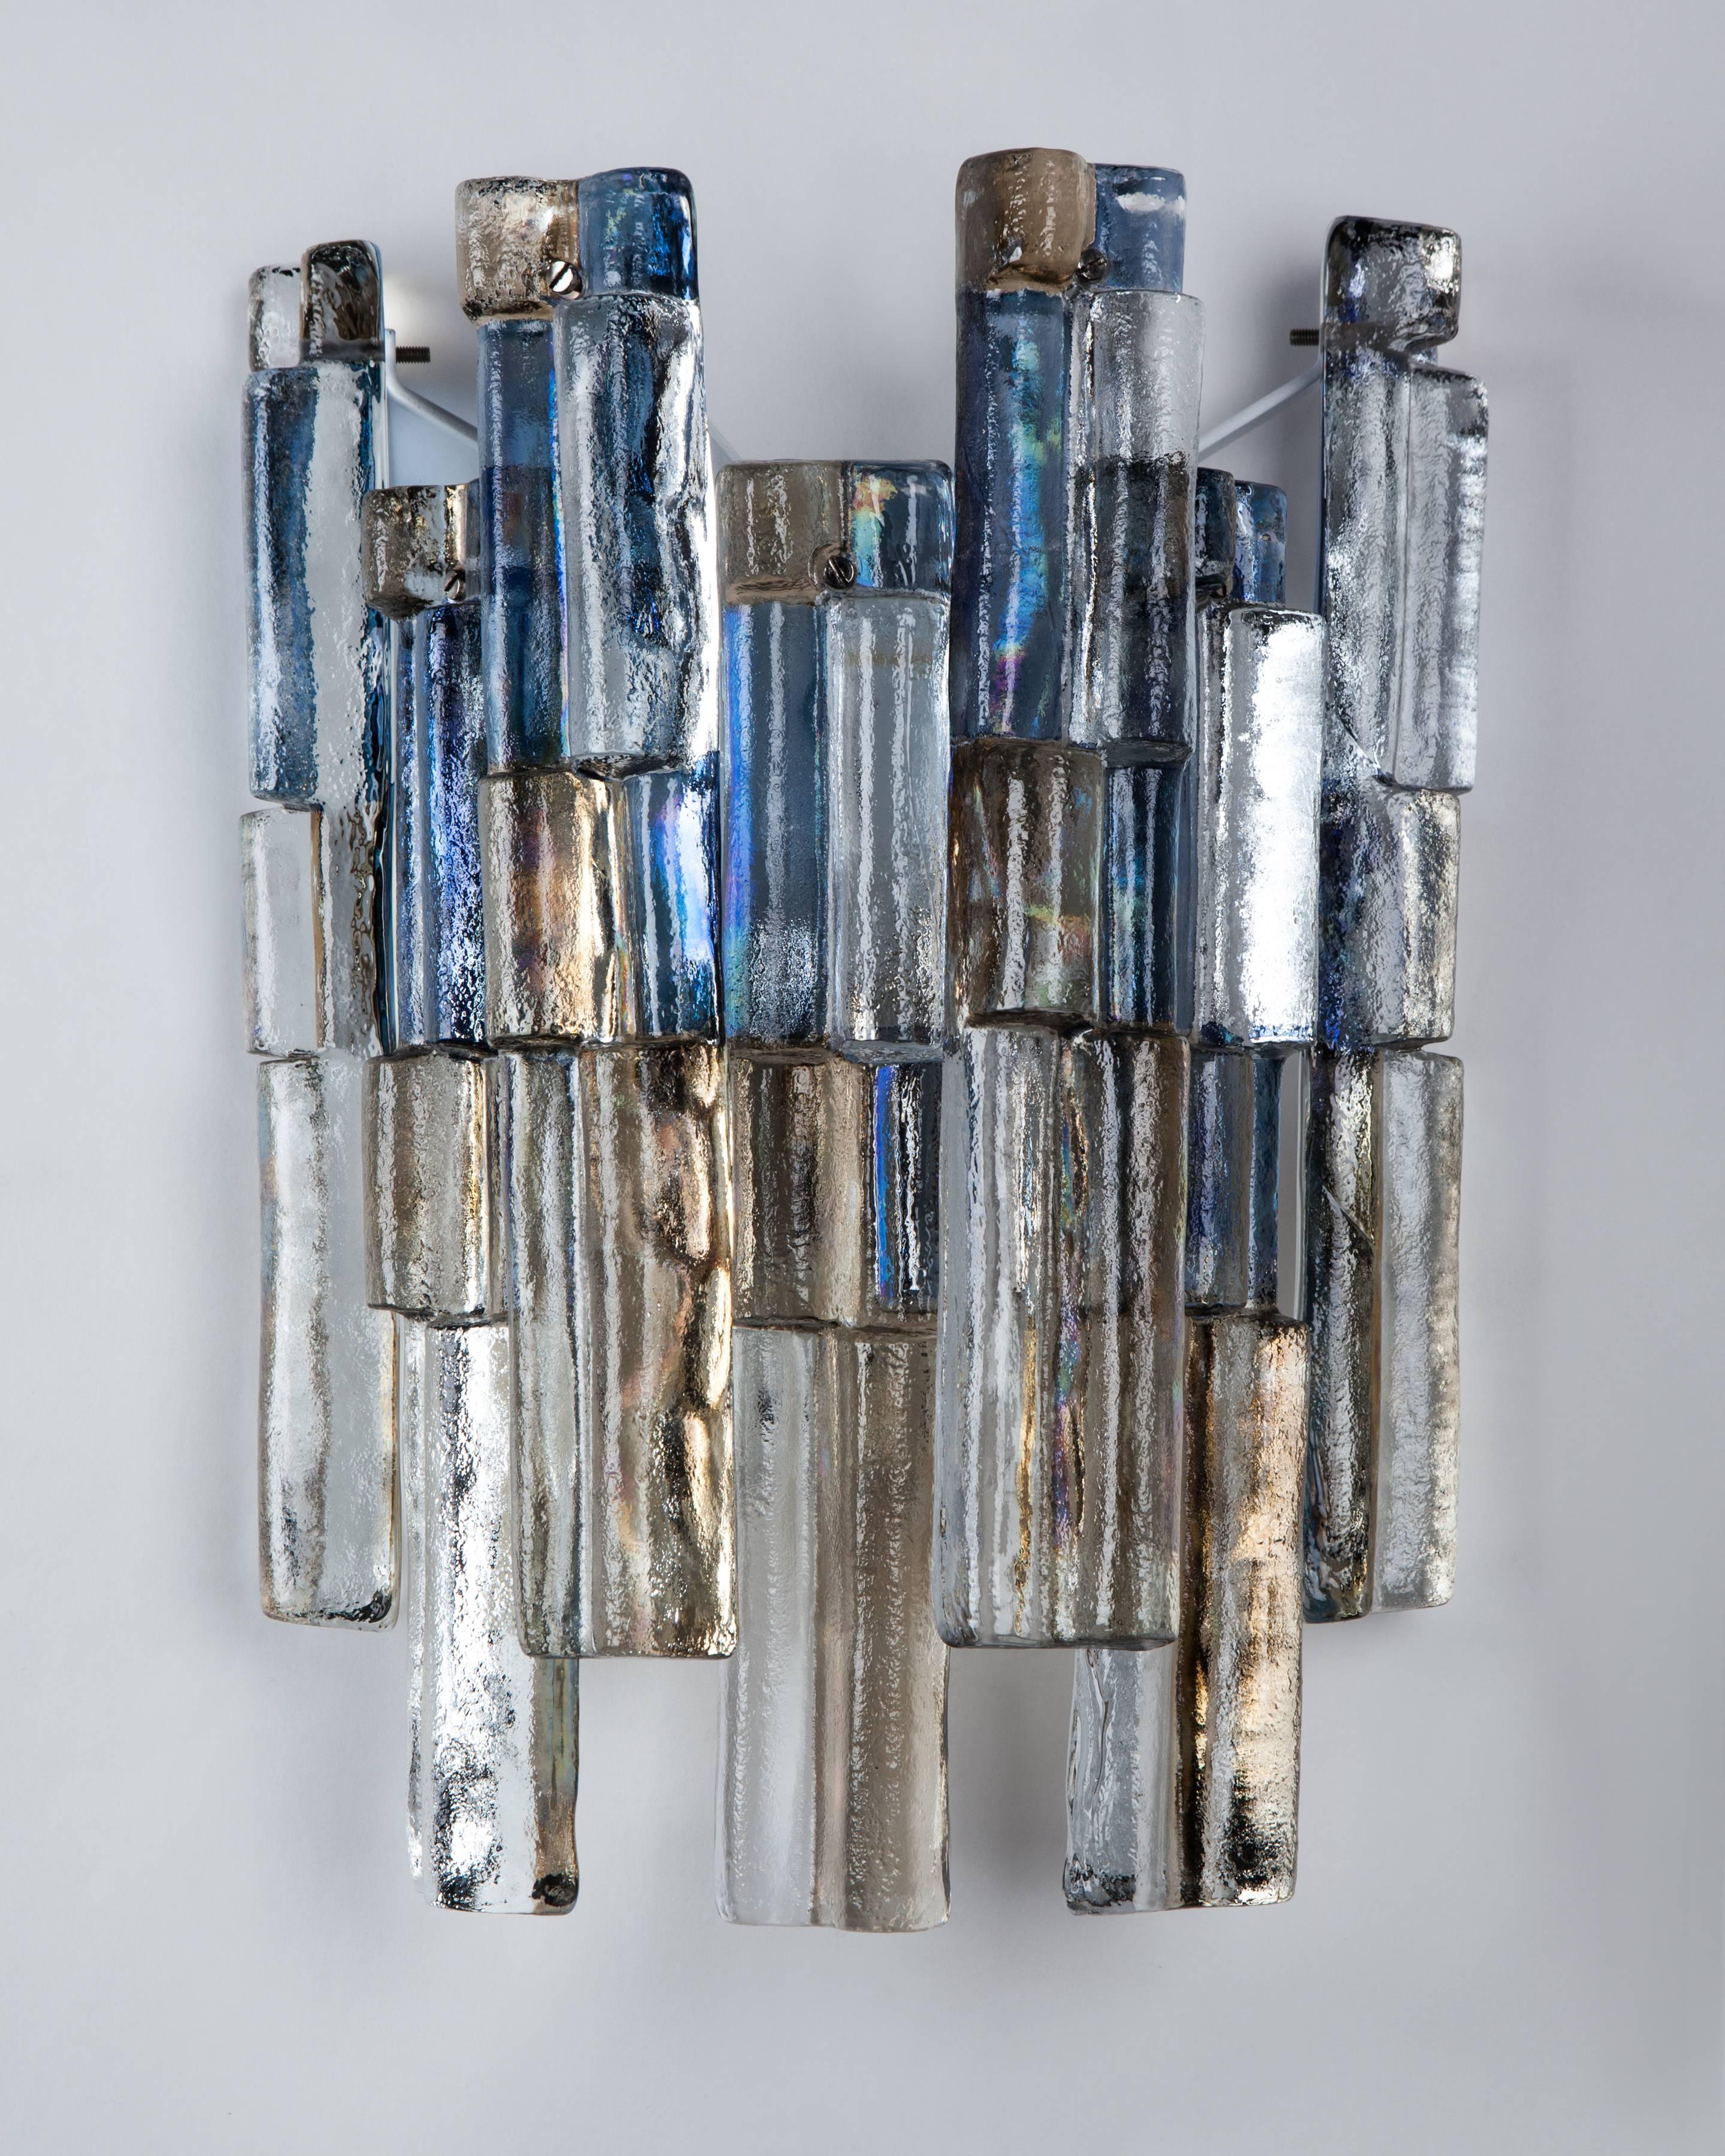 AIS3041
A pair of vintage sconces with cast glass elements having an iridescent blue tinted finish on white lacquer frames with polished nickel fittings. Signed by the Austrian glassmaker Kalmar. Due to the antique nature of this fixture, there may